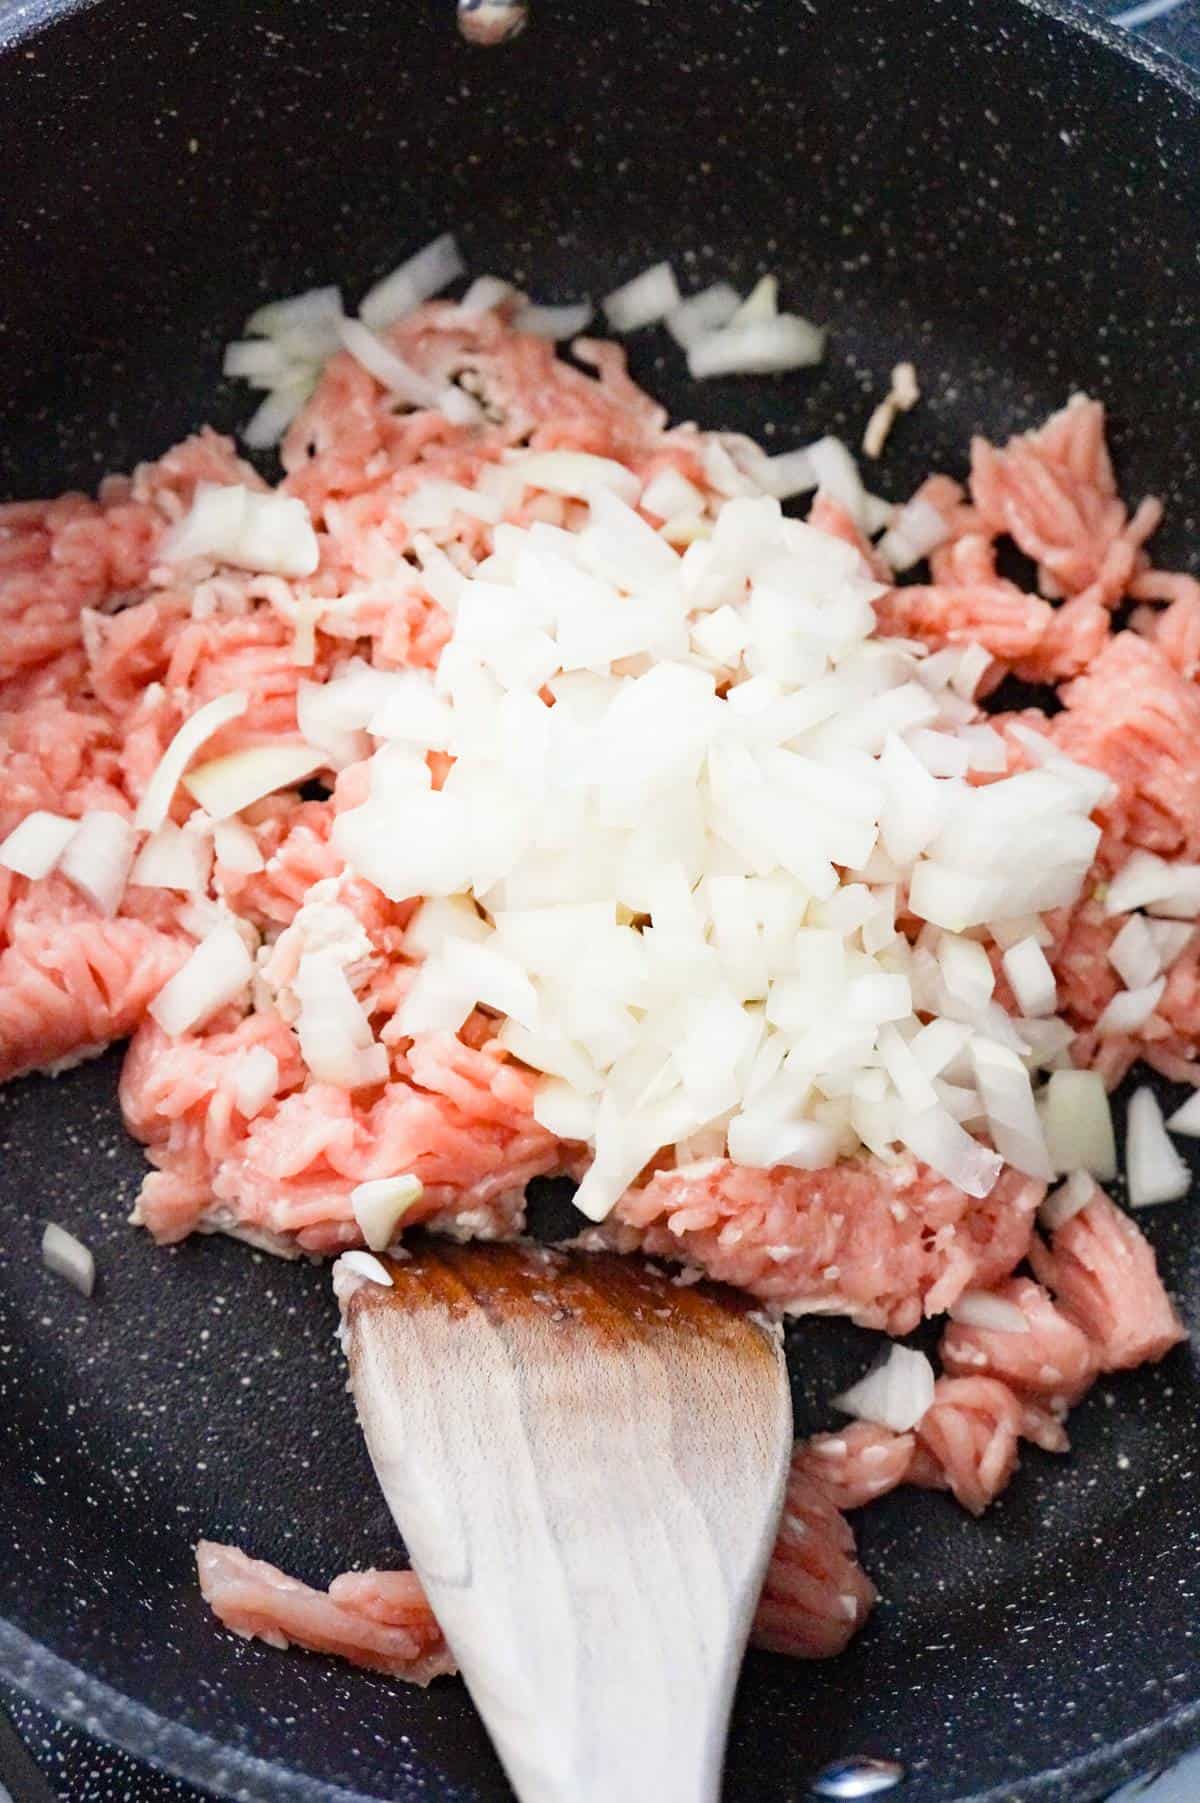 diced onions on top of raw ground chicken in a saute pan